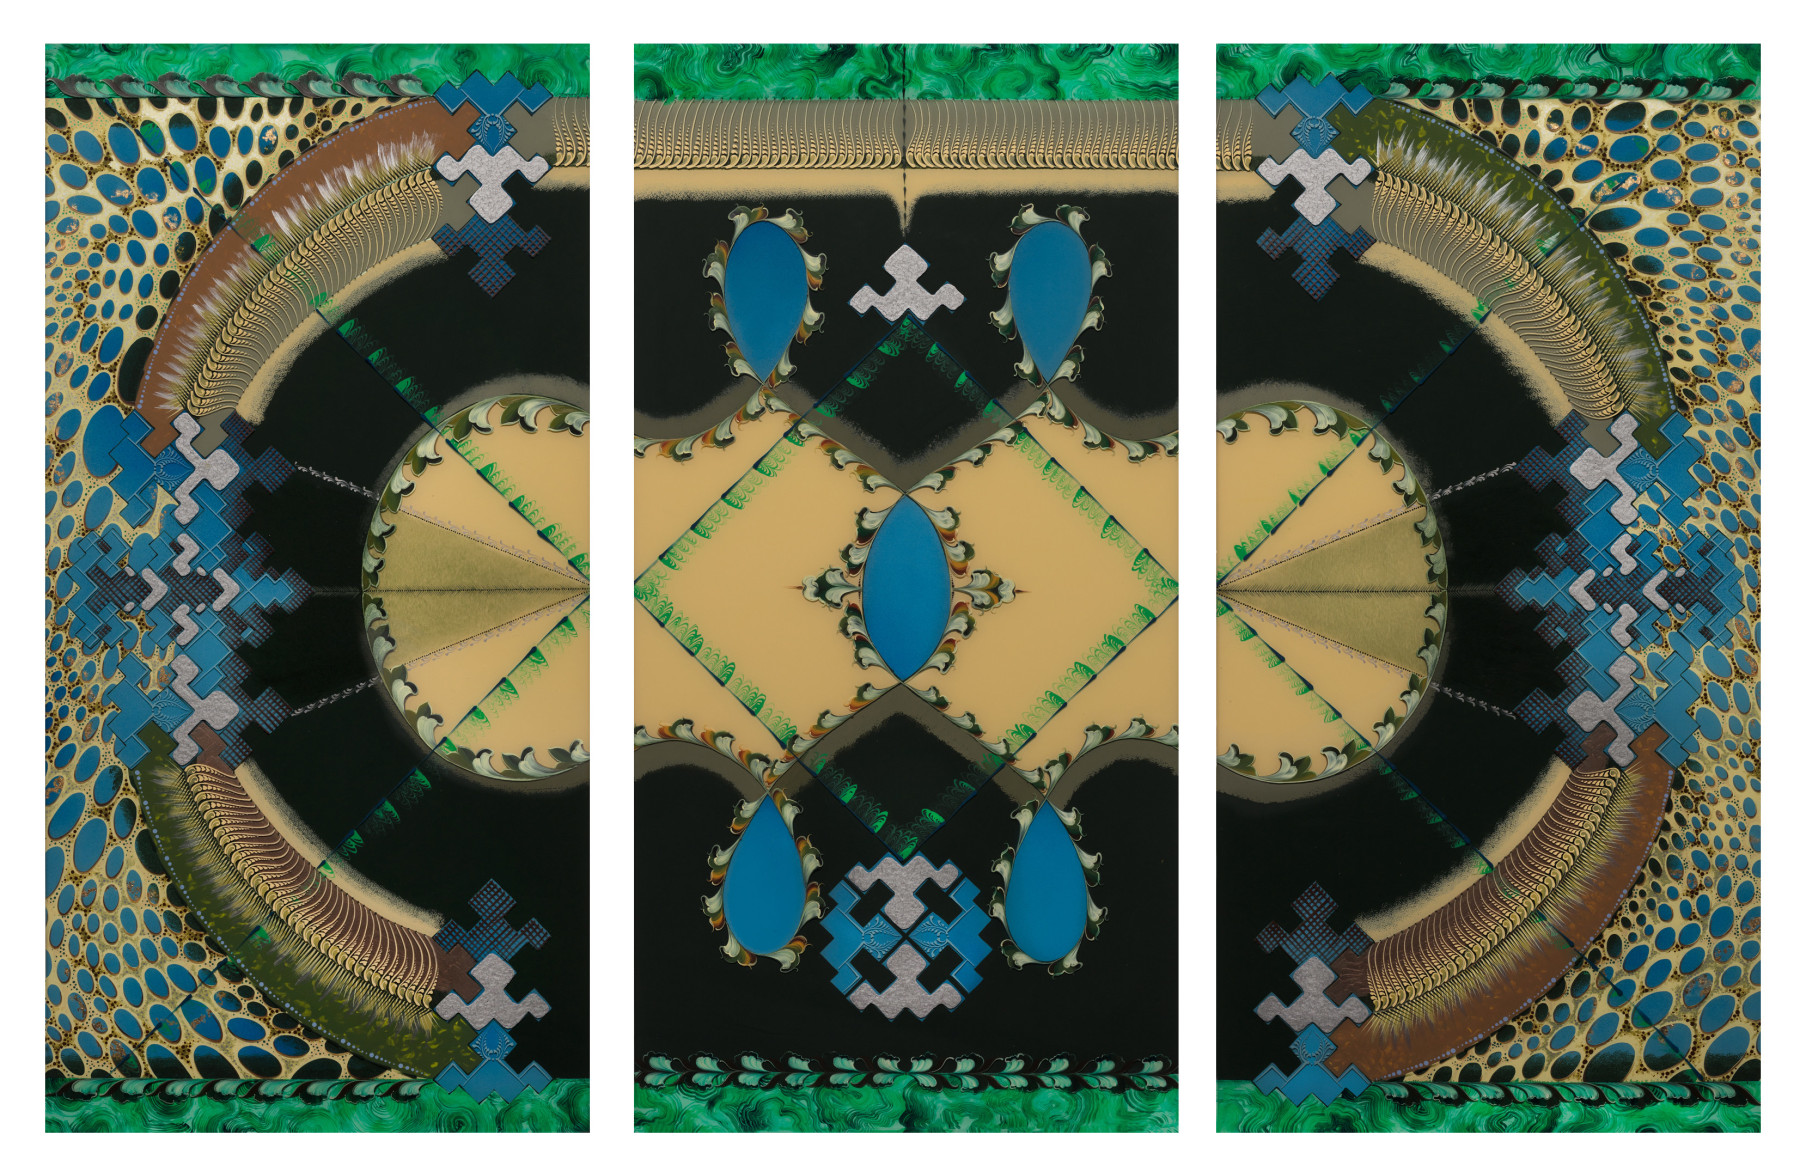 A three panel painting that overall suggests a stadium or racetrack, but is composed of organic shapes suggesting cells